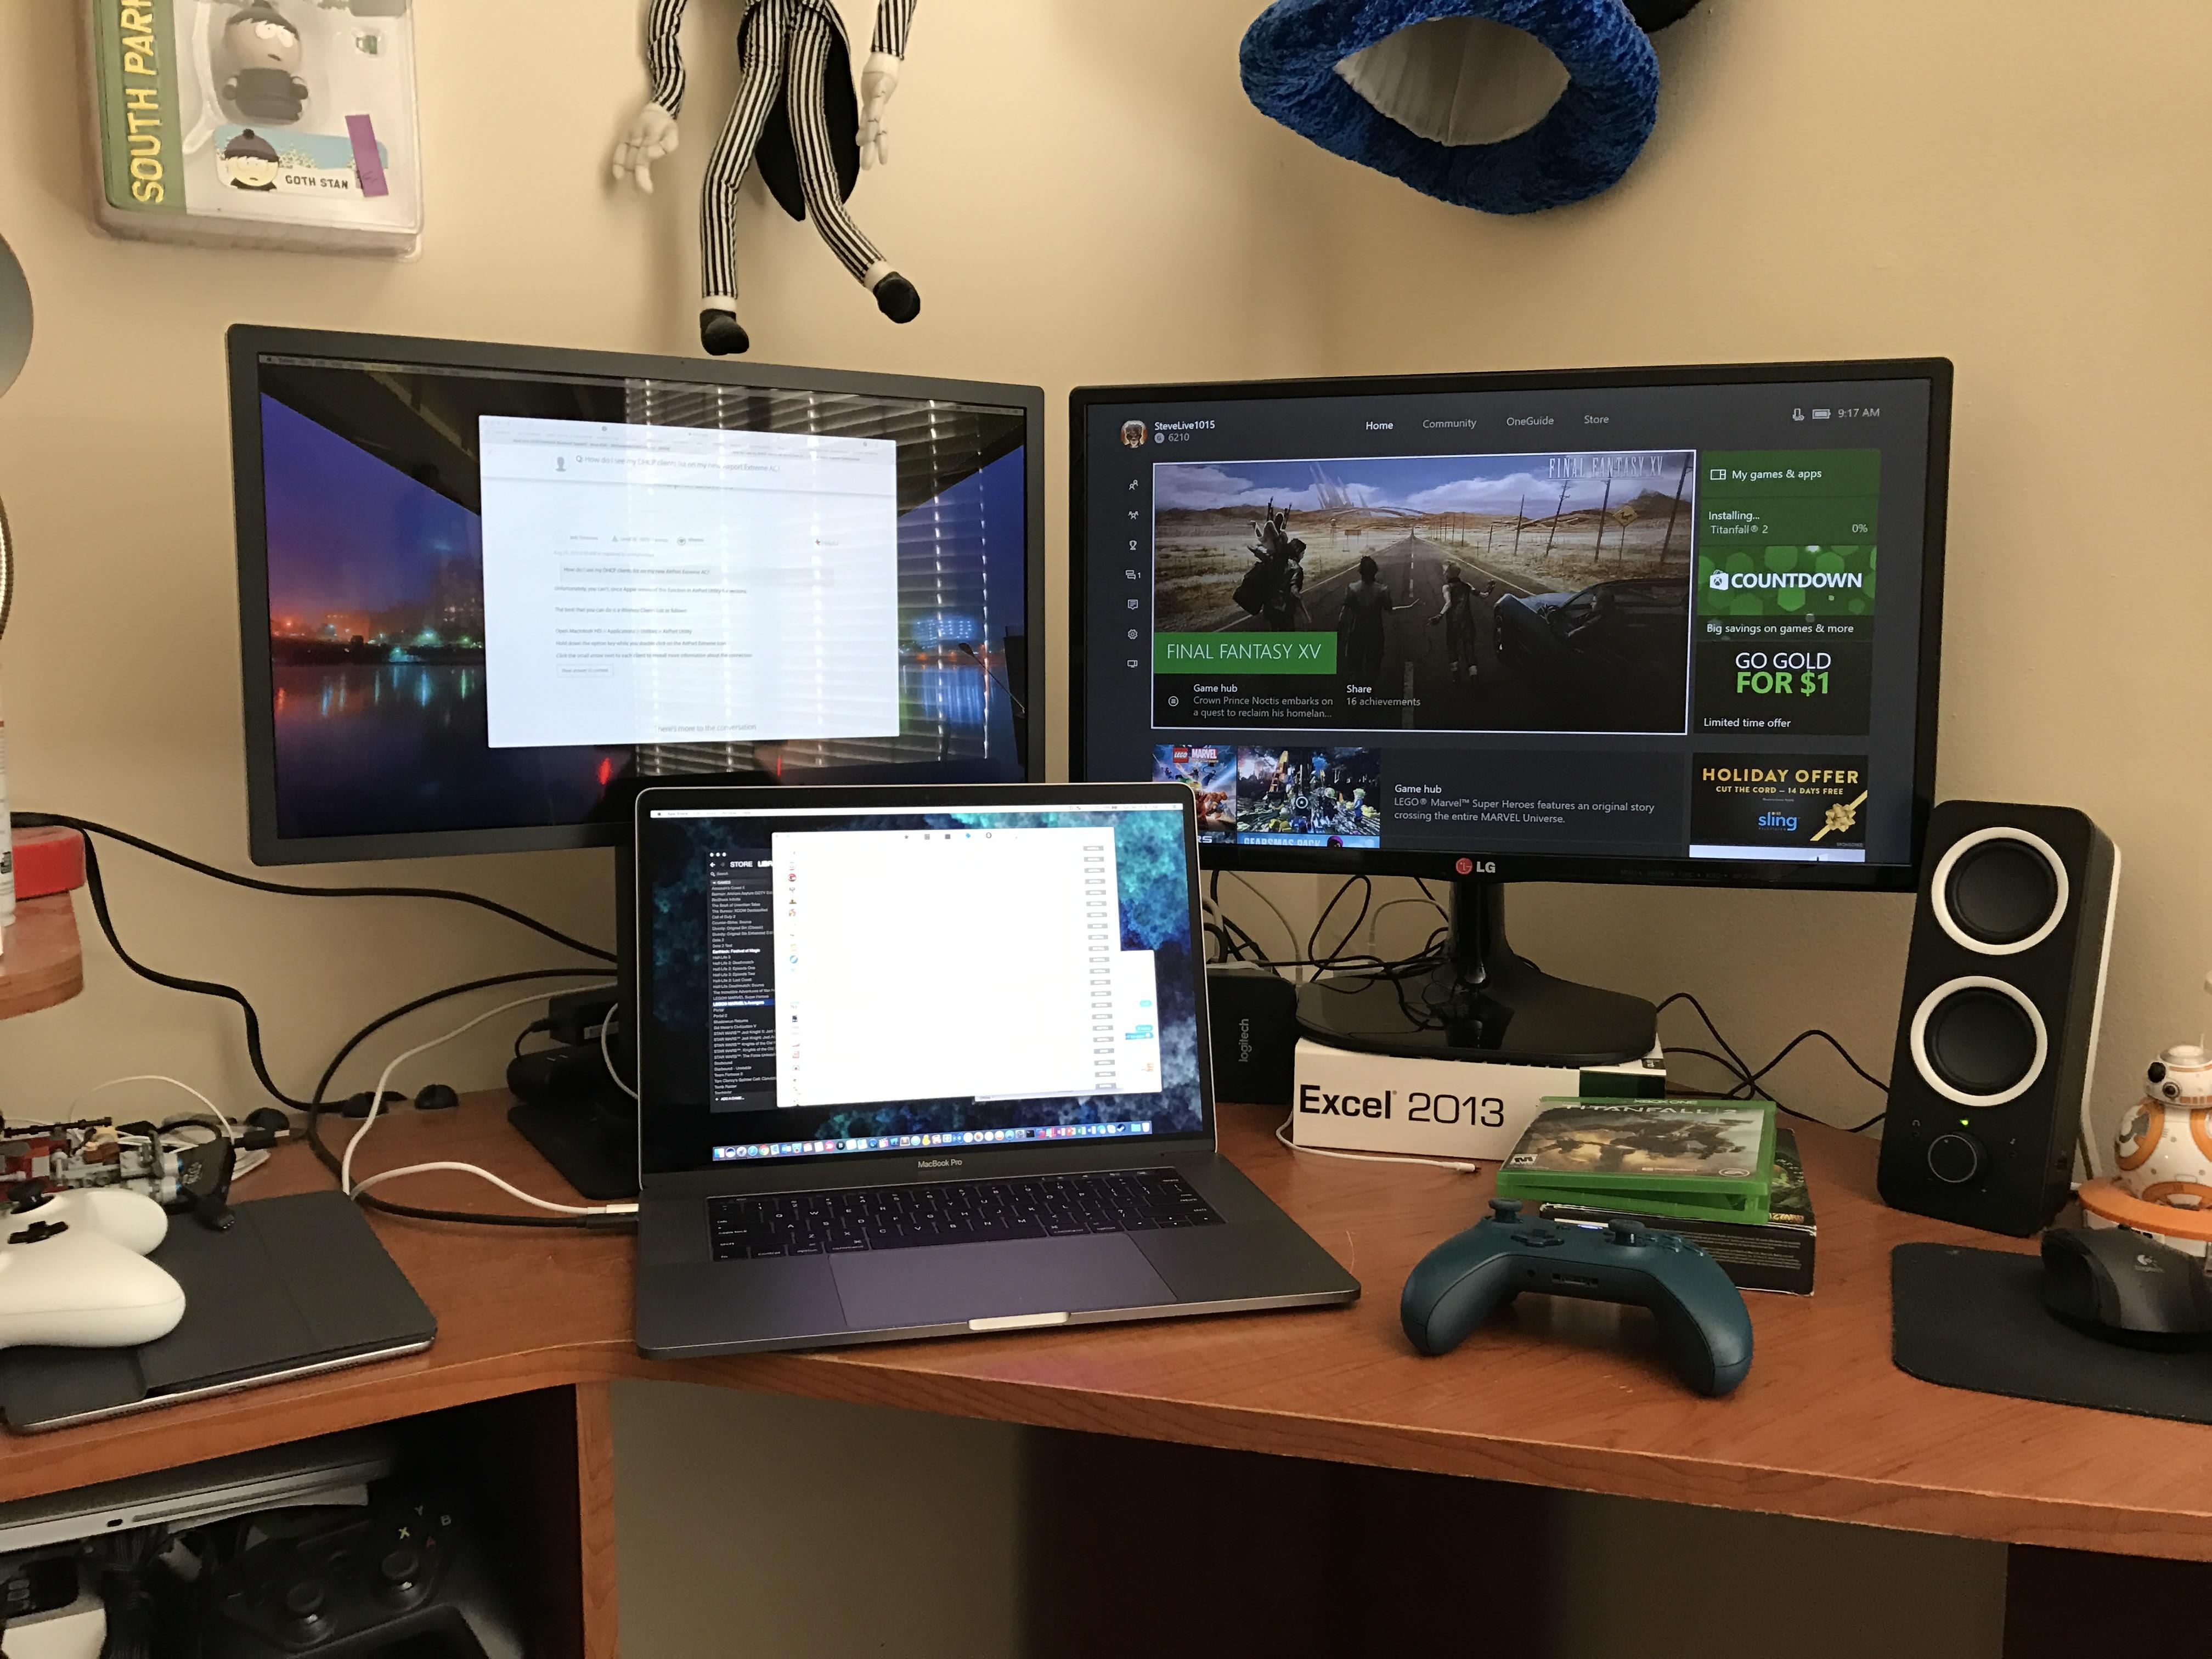 Using Mac Book As Monitor For Xbox One